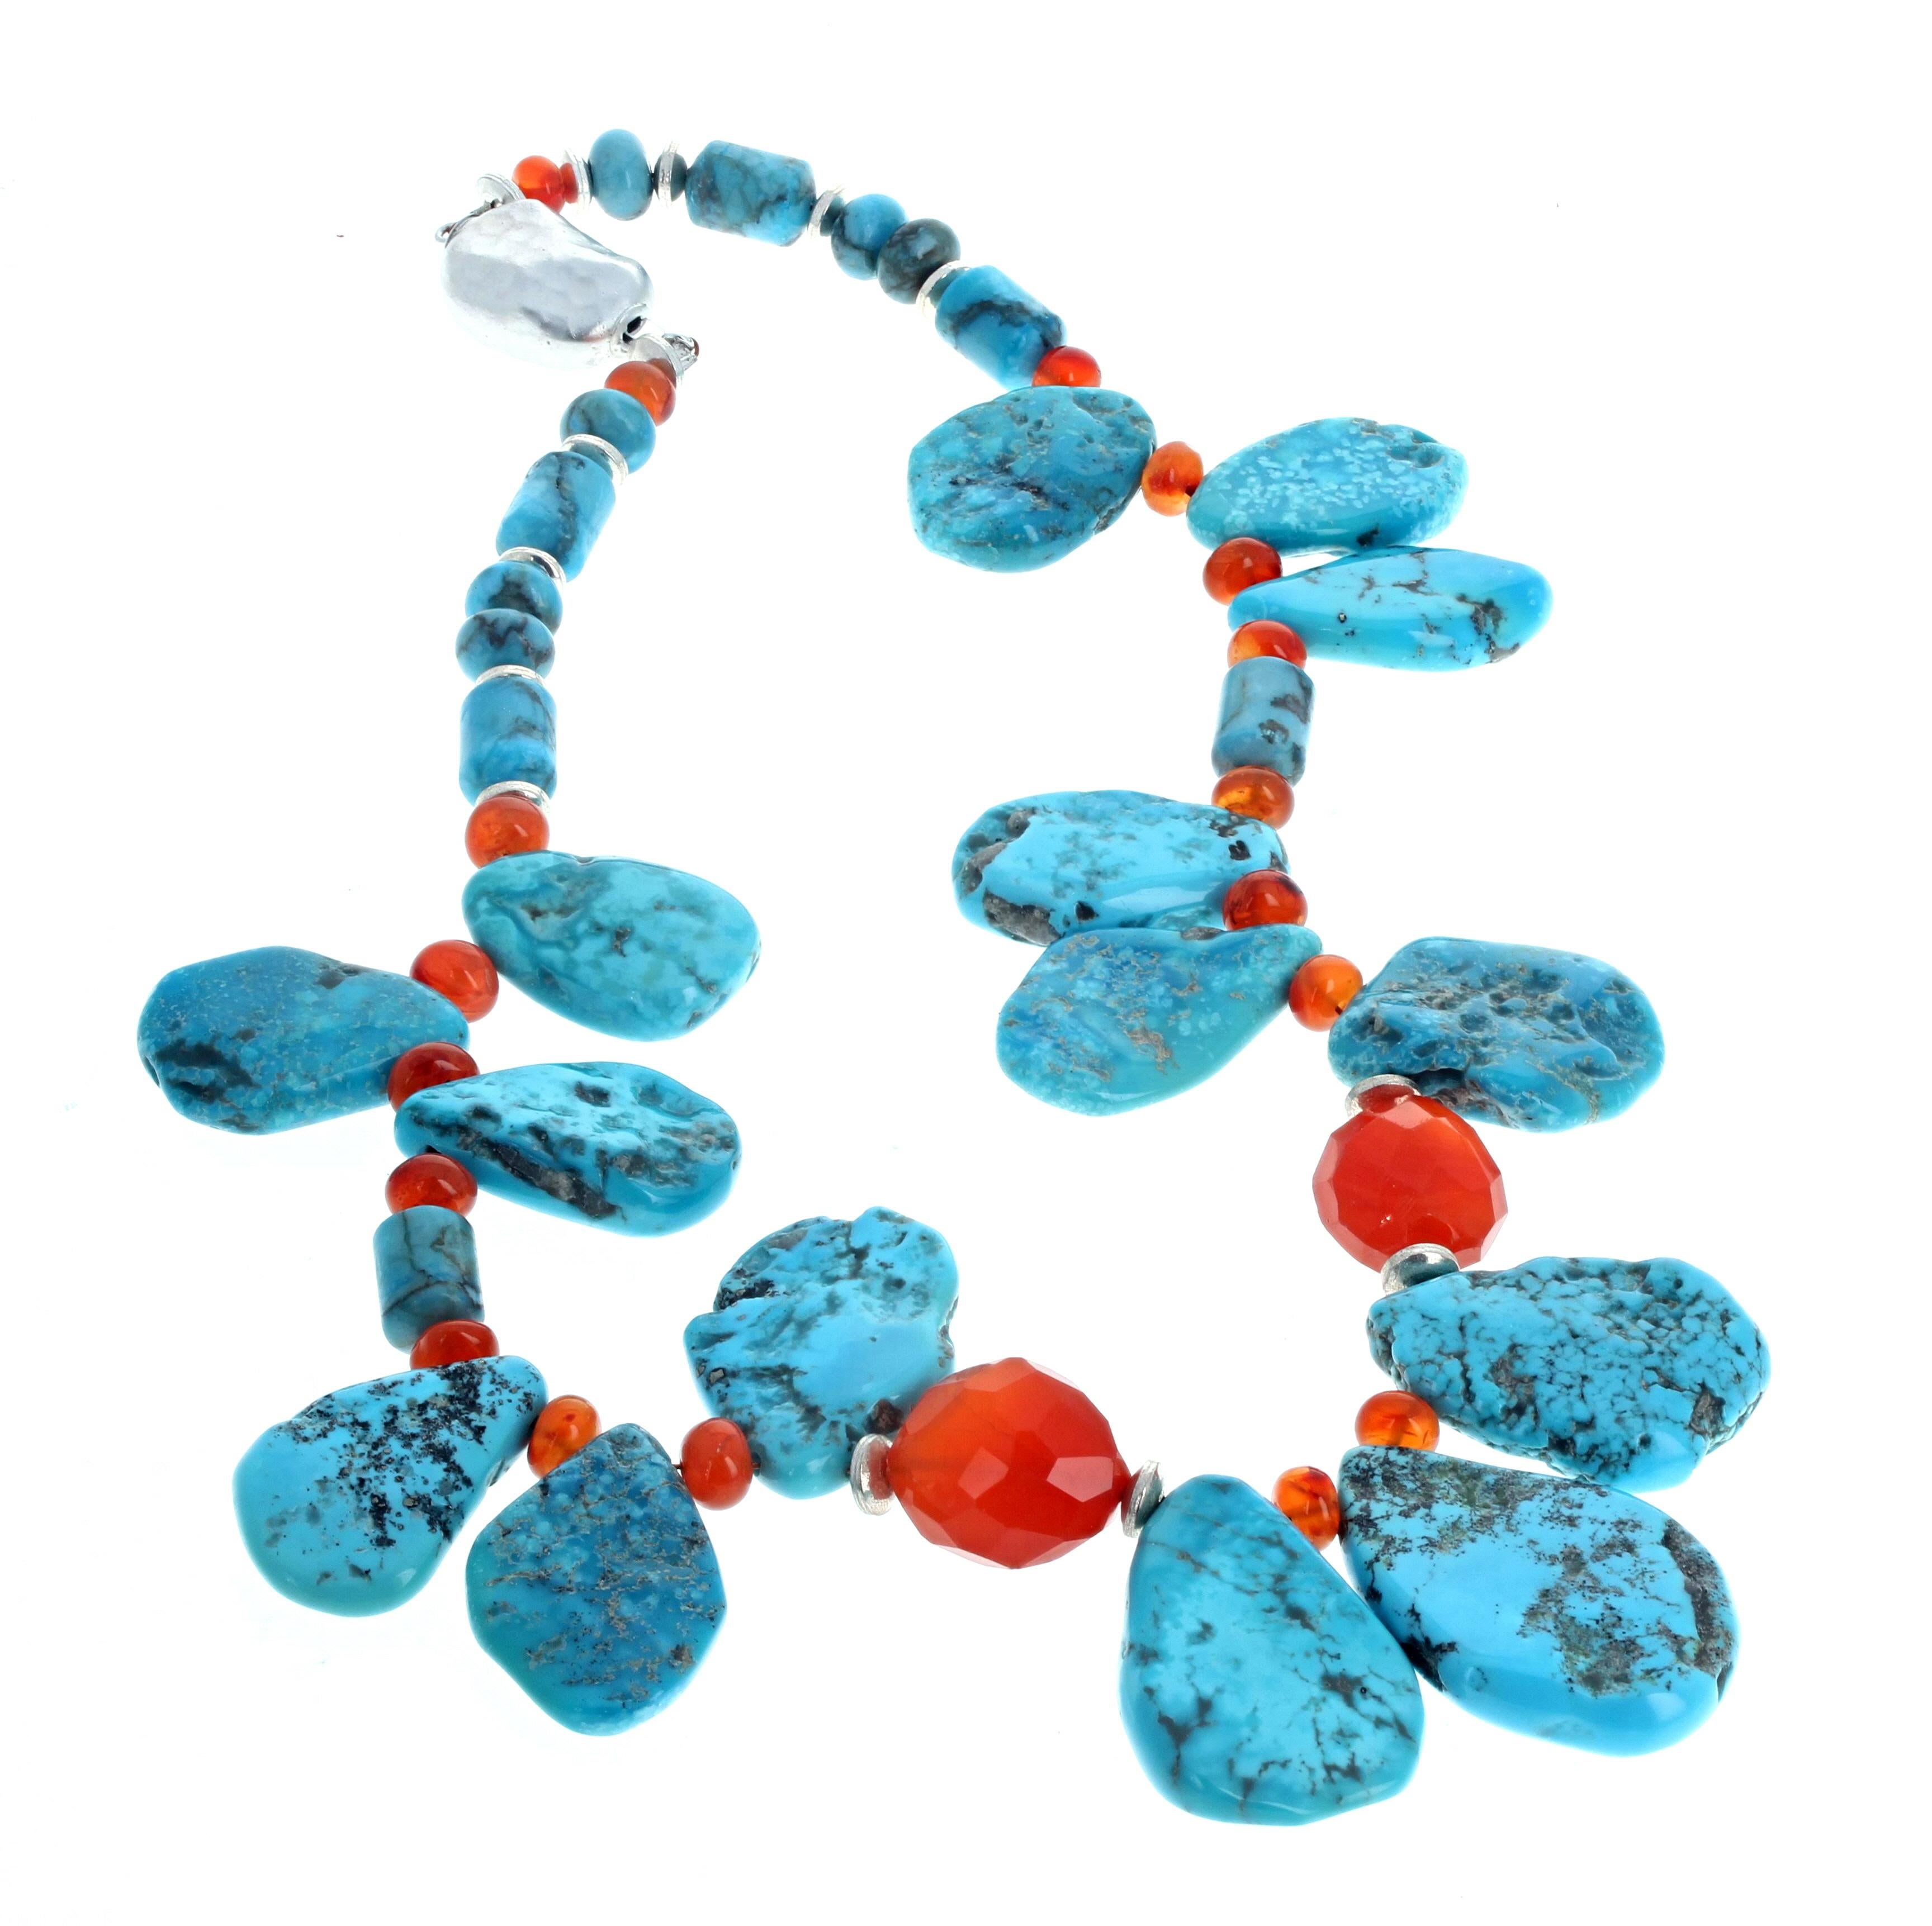 Mixed Cut AJD Gorgeous Natural American Beauty Turquoise & Real Gemcut Carnelians Necklace